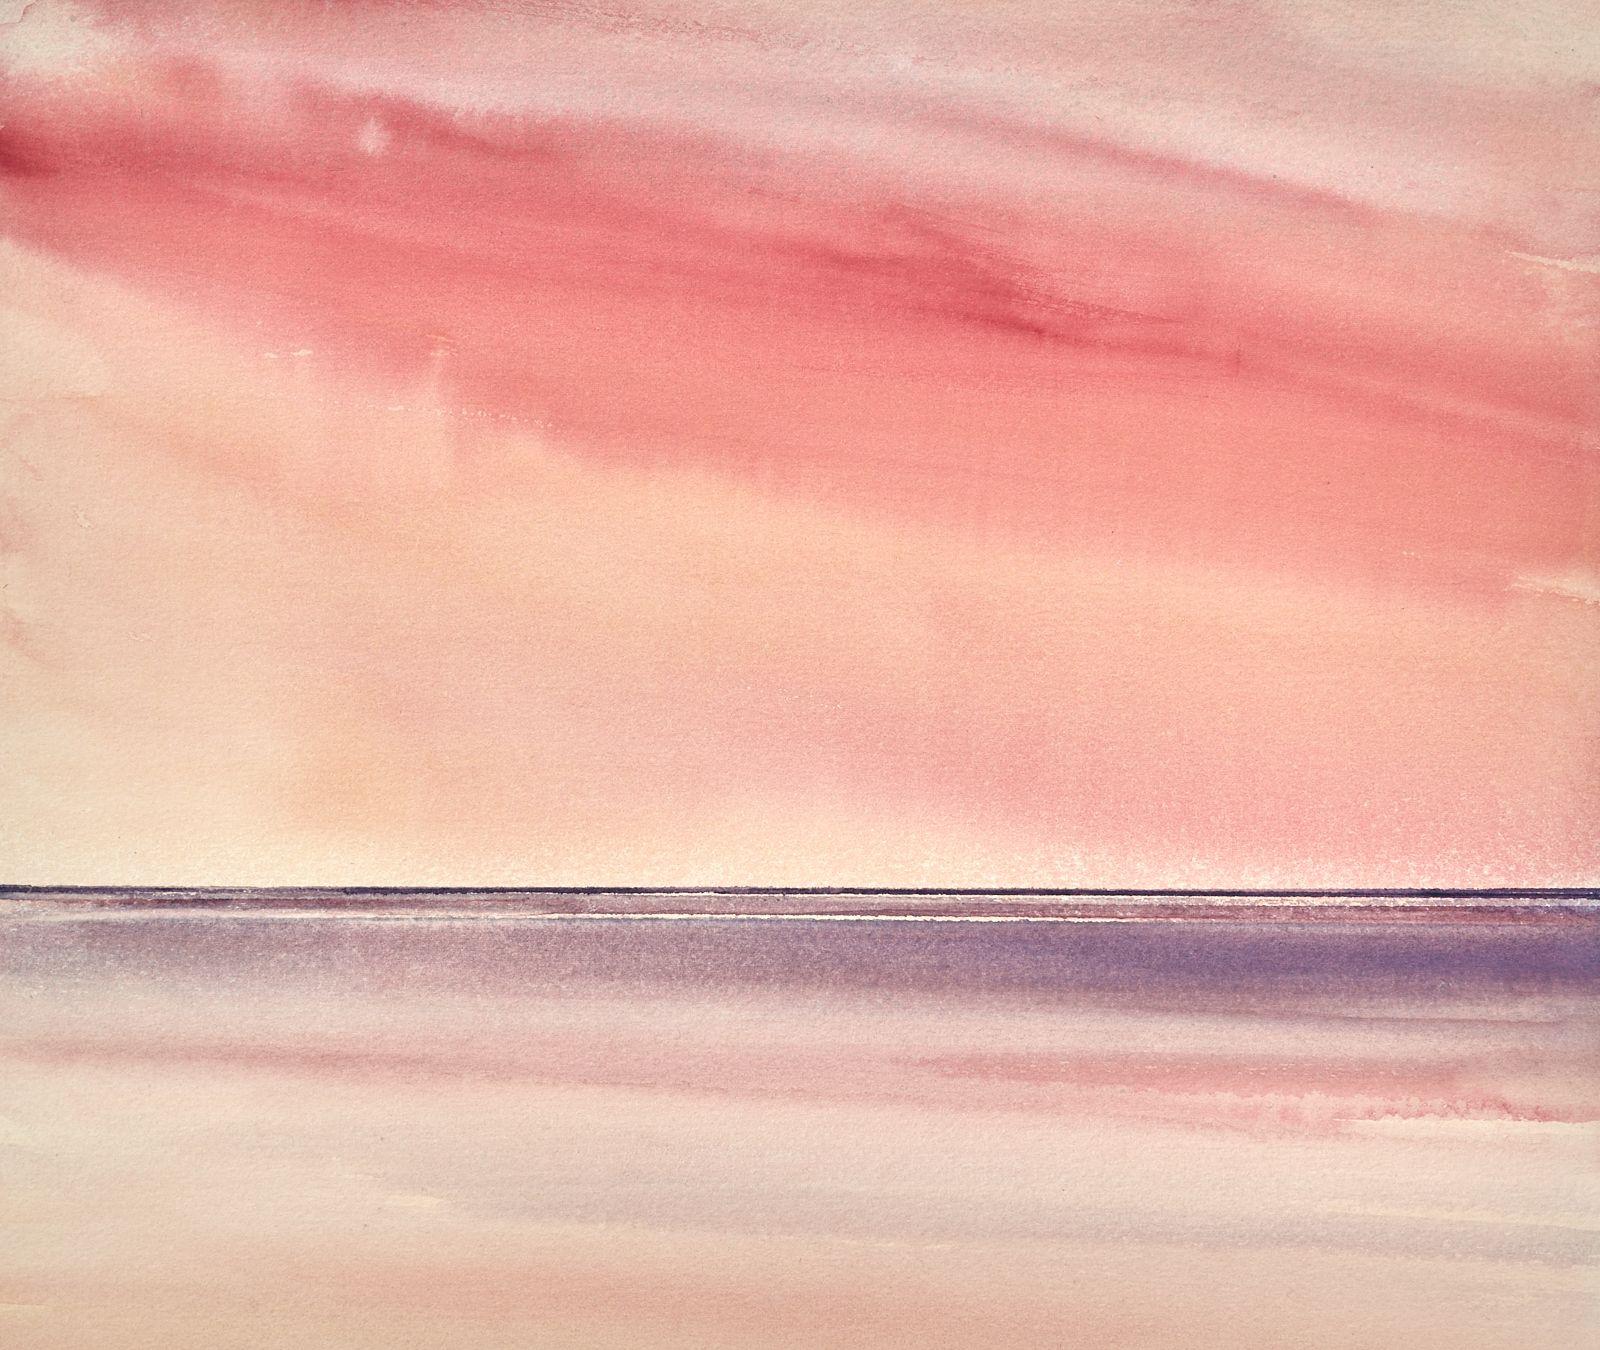 Twilight, Lytham St Annes Beach, Painting, Watercolor on Watercolor Paper - Art by Timothy Gent